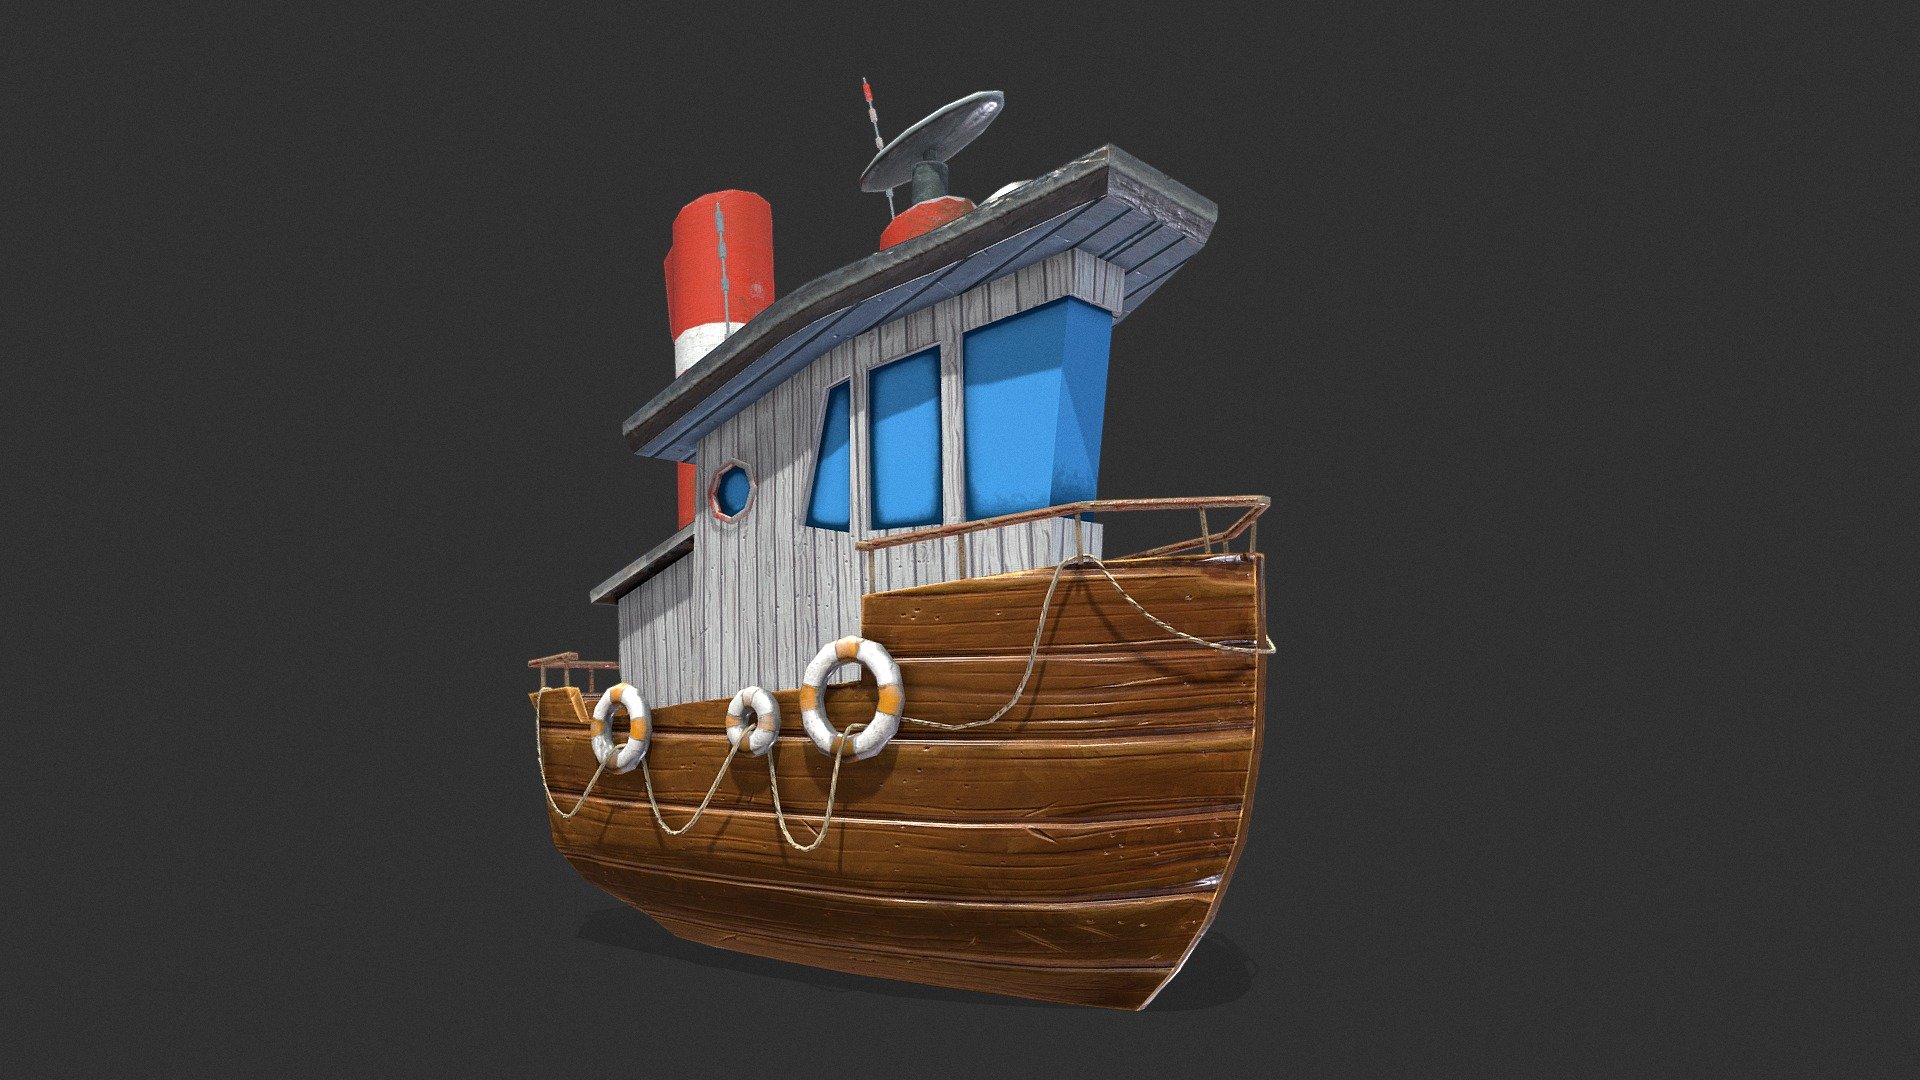 3D model of Cartoon Mini Boat
- Resolution of textures: 2048x2048
- Originally created with 3ds Max 2018 
- Textured created with Substance Painter 
- Unit system is set to centimeters.

Texture Set: 
Diffuse, Base Color, IOR, gloss, heigh, ior, normal, reflection, specular, AO, metallic, roughness
Special notes: 
- .fbx format is recommended for import in other 3d software. If your software doesn't support .fbx format, please use .3ds format; .obj, format was exported from 3ds Max. 
The geometry for .obj format is set to tris 3d model